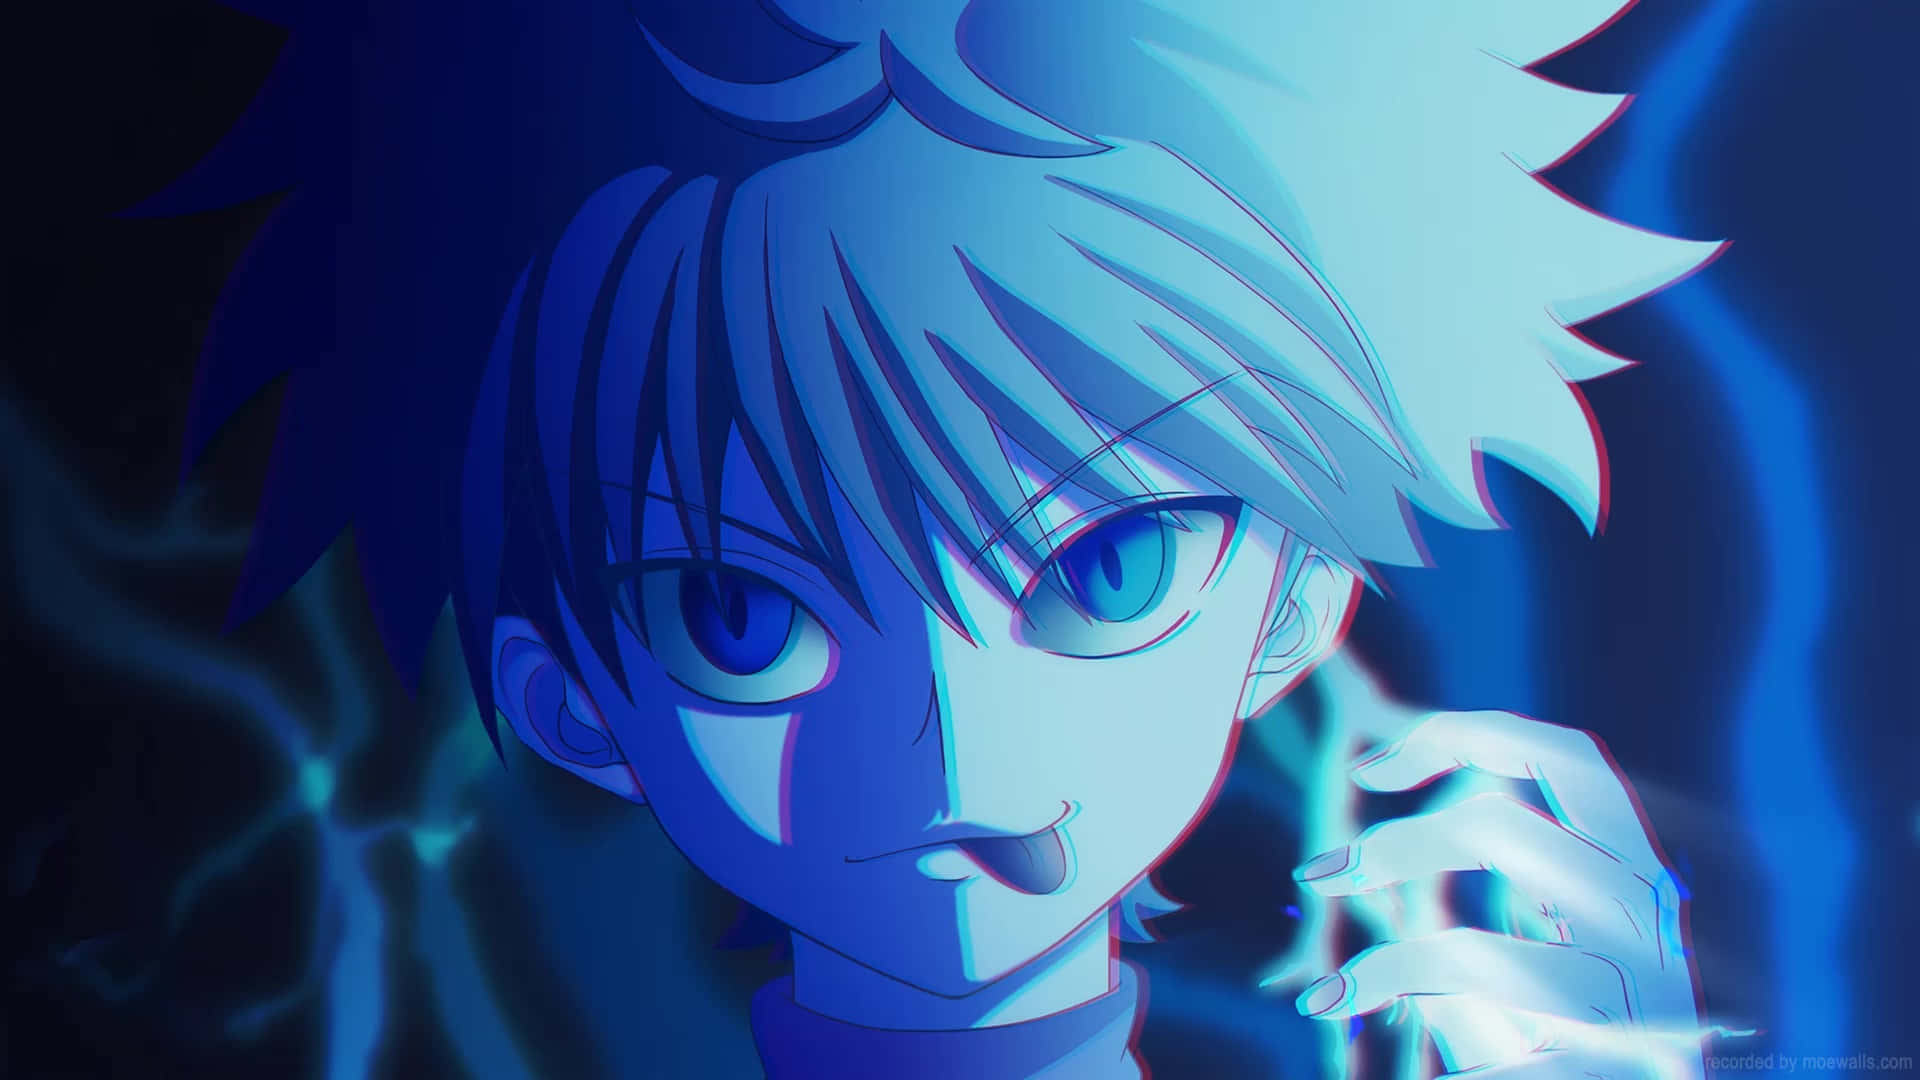 The Strong and Charismatic Killua